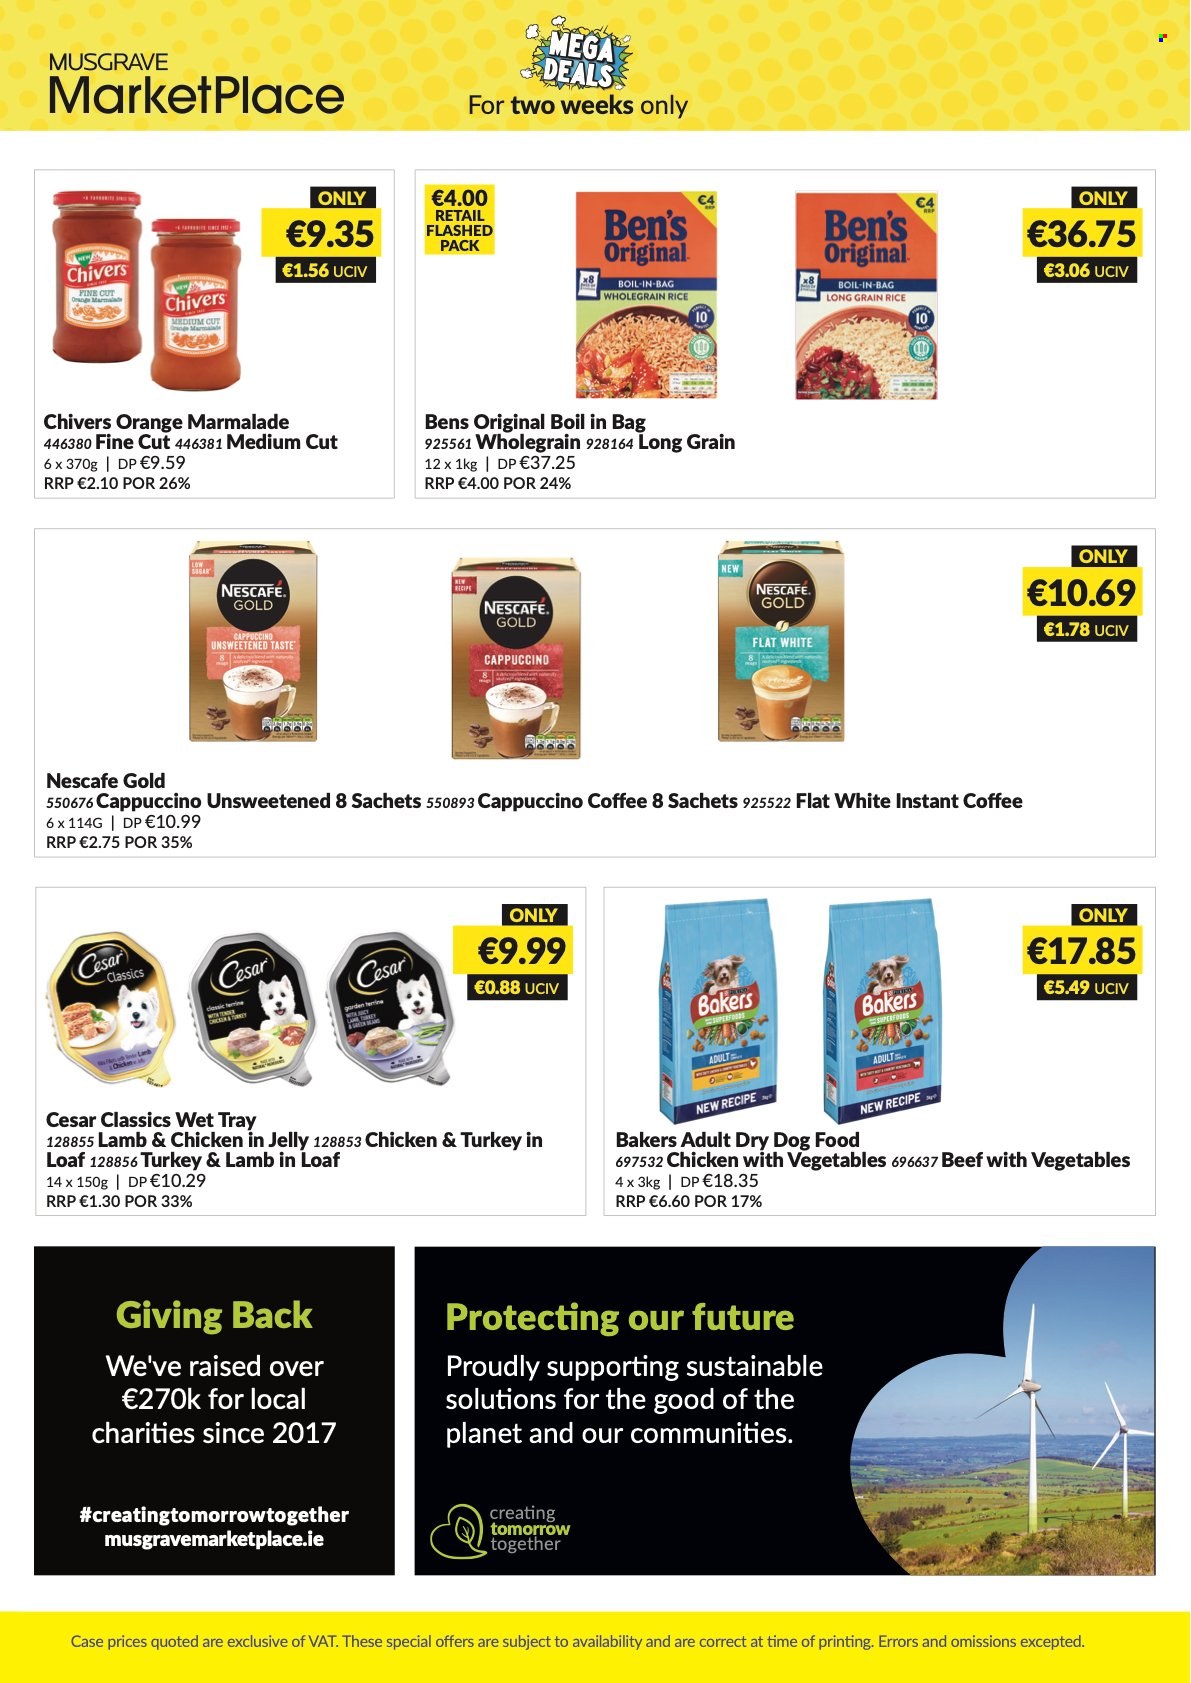 MUSGRAVE Market Place offer  - 19.6.2022 - 2.7.2022 - Sales products - orange, rice, whole grain rice, long grain rice, cappuccino, instant coffee, Nescafé, tray, animal food, dry dog food, dog food, Bakers. Page 3.